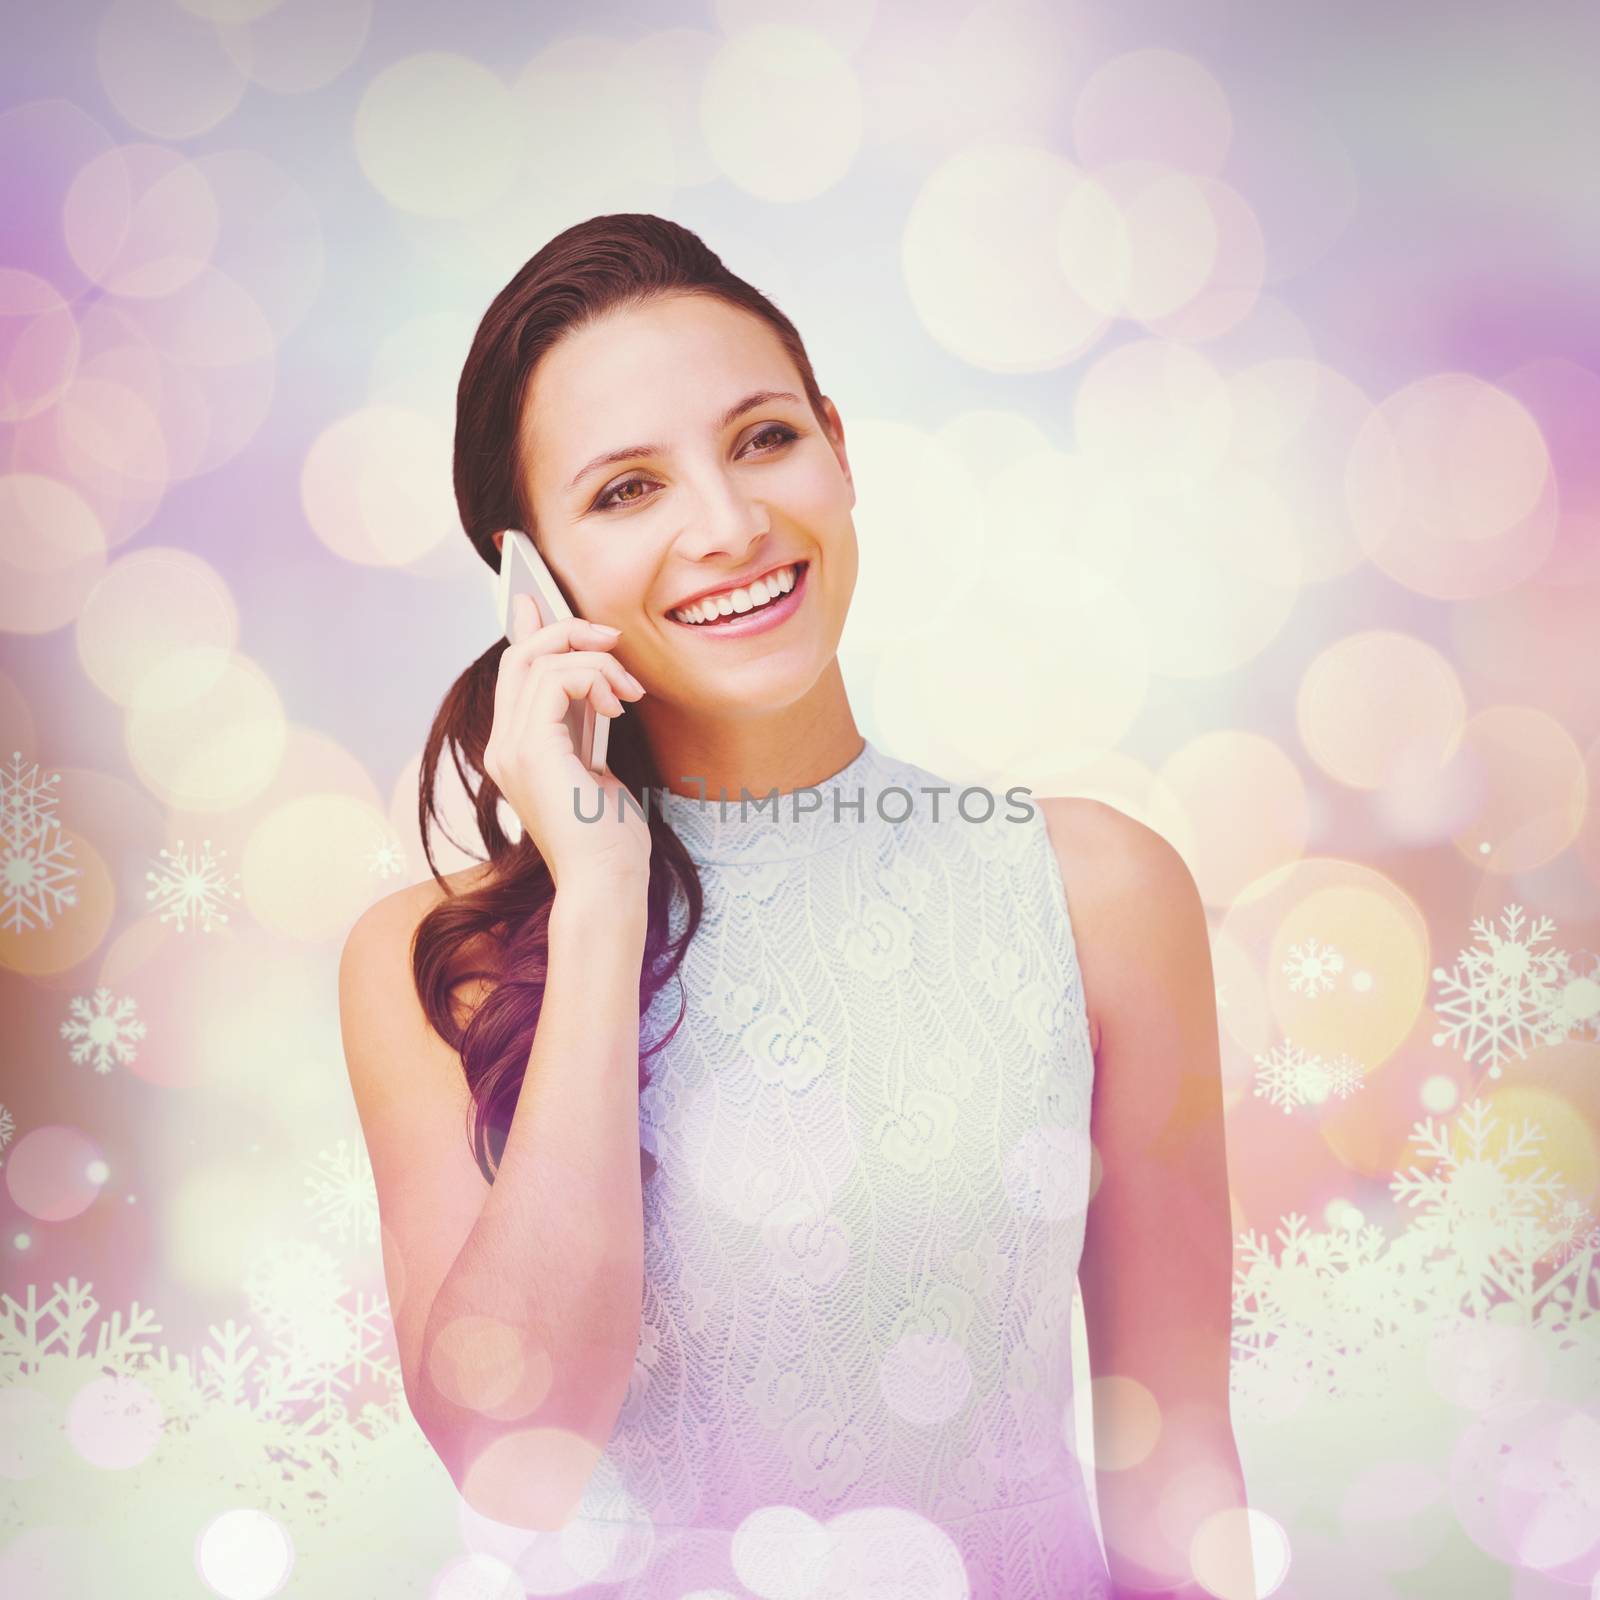 Brunette on the phone against snowflake pattern